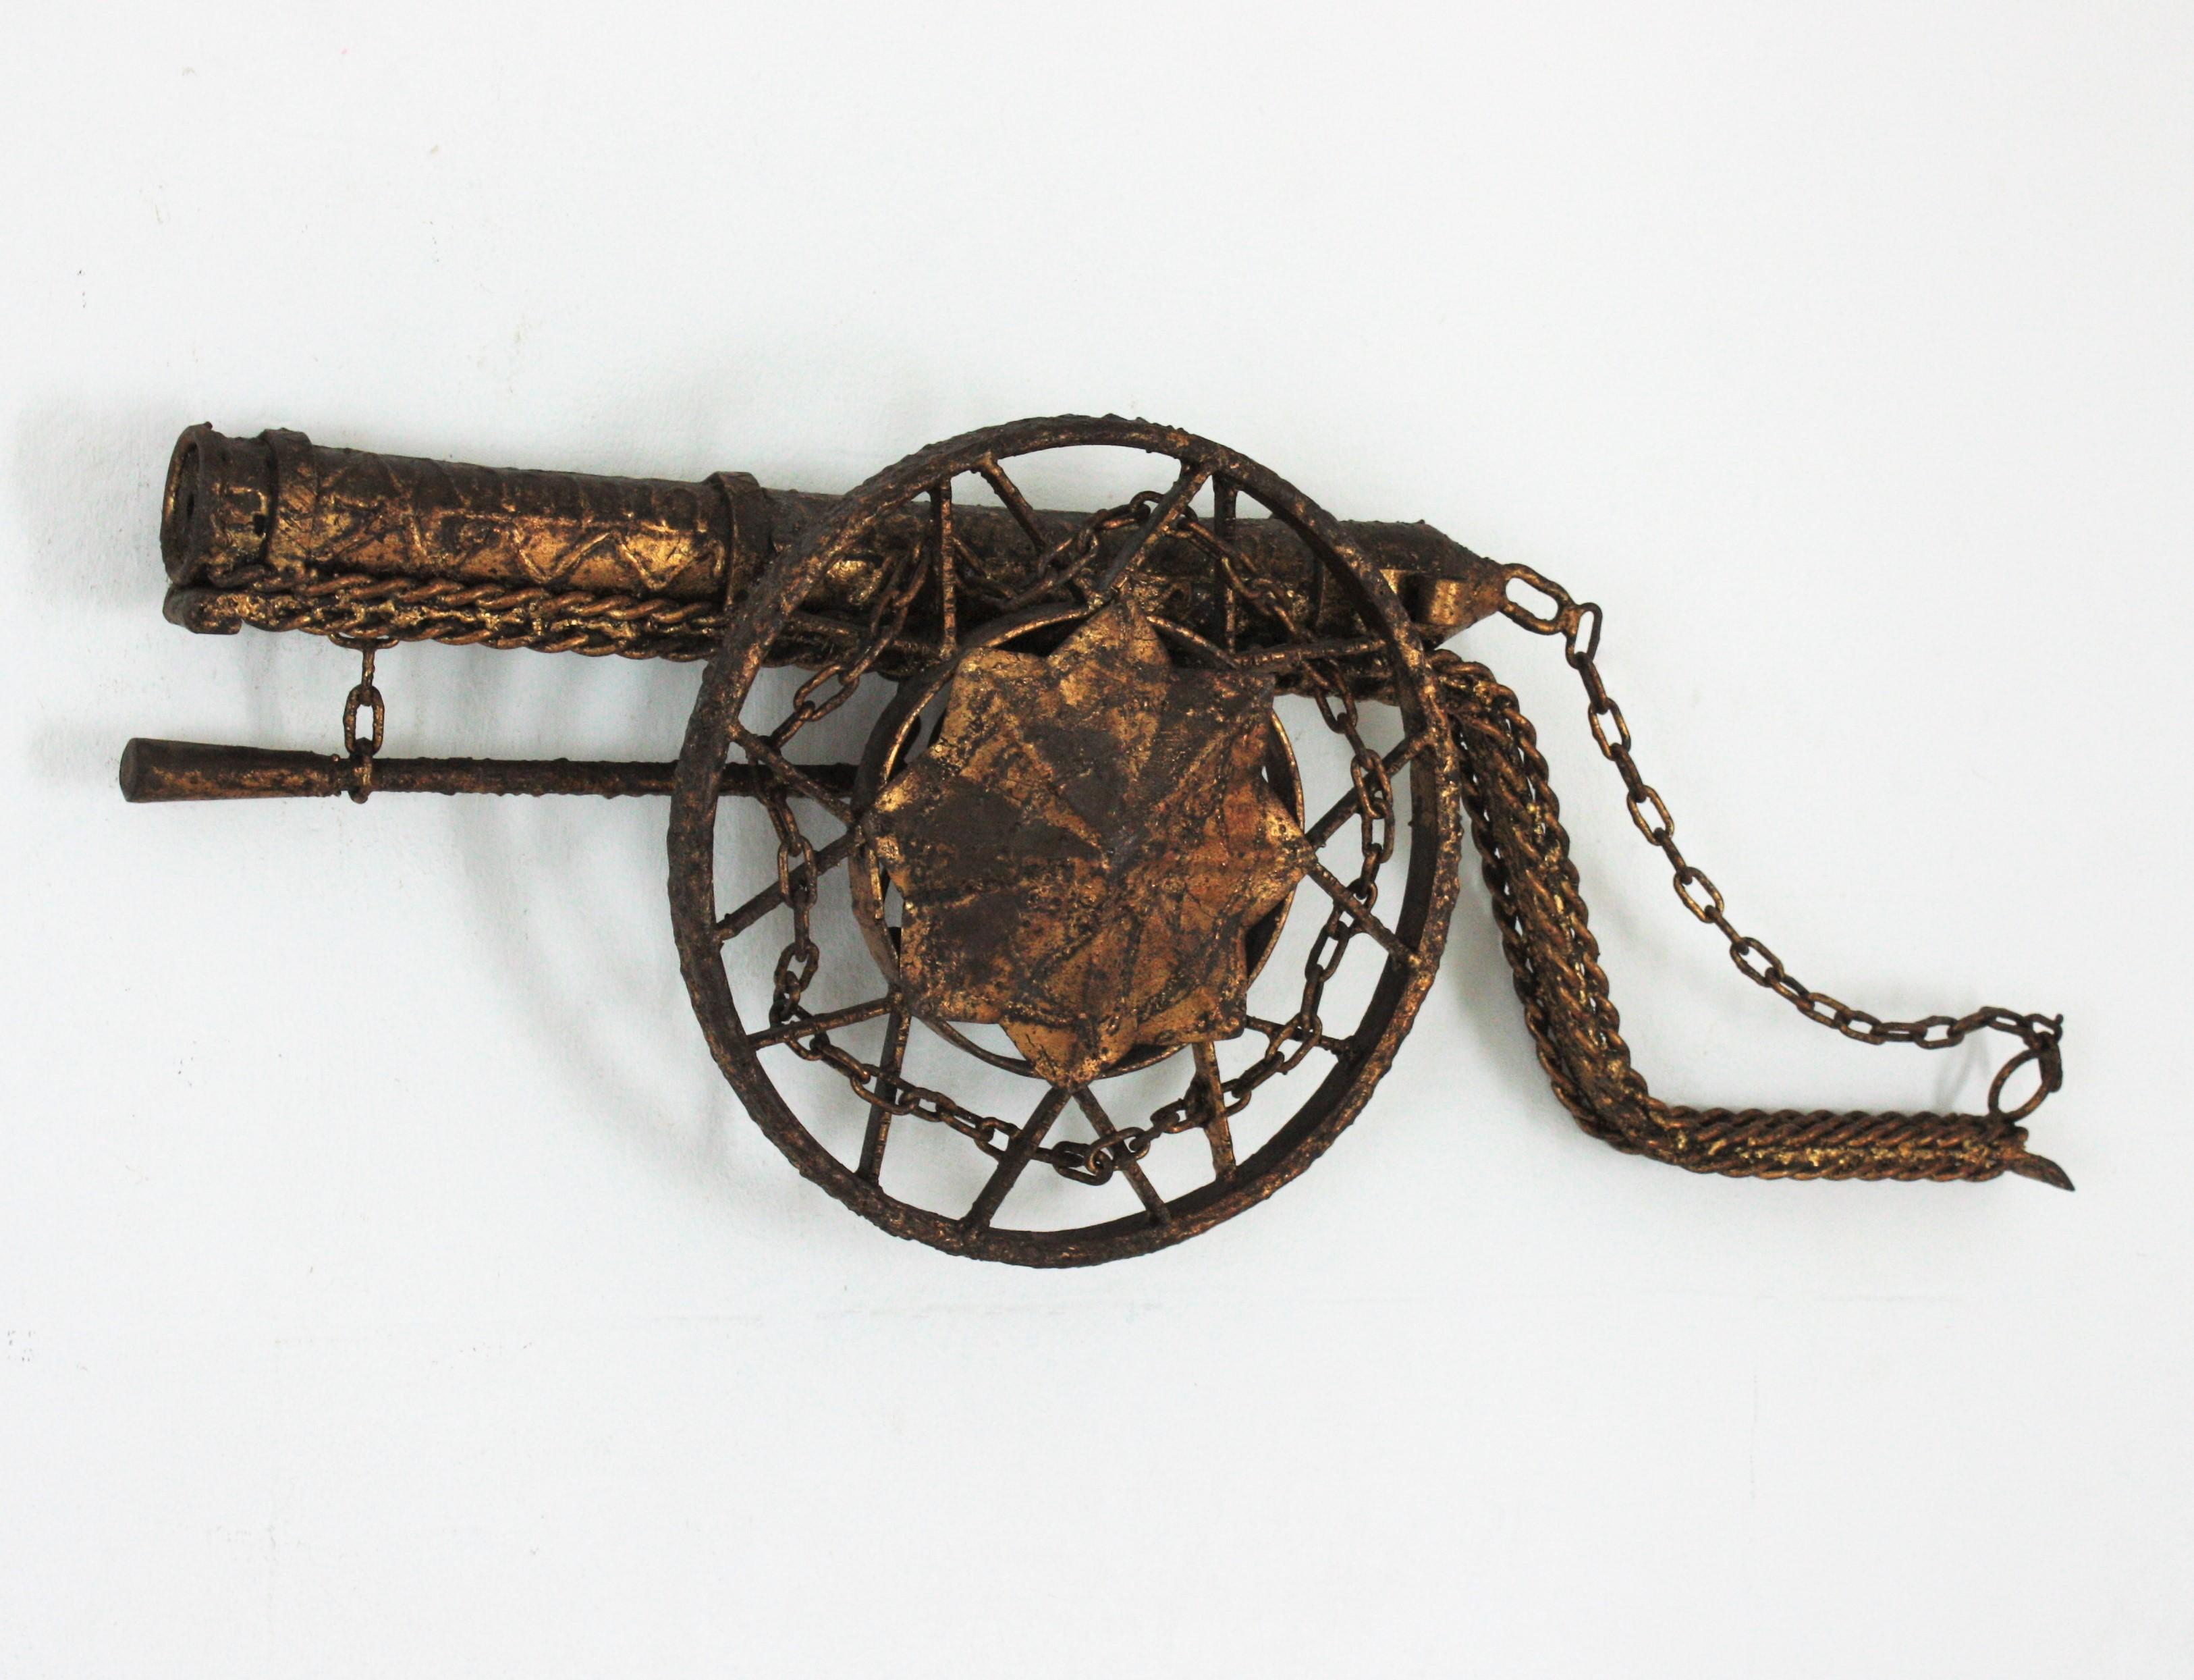 Rare Spanish Colonial style cannon wall sconce or wall sculpture, Spain, 1950s.
Spectacular wall sconce with a beautiful design full of details. Adorned by twisting iron rope and chains.
handcrafted in Spain at the mid-20th century period with hand